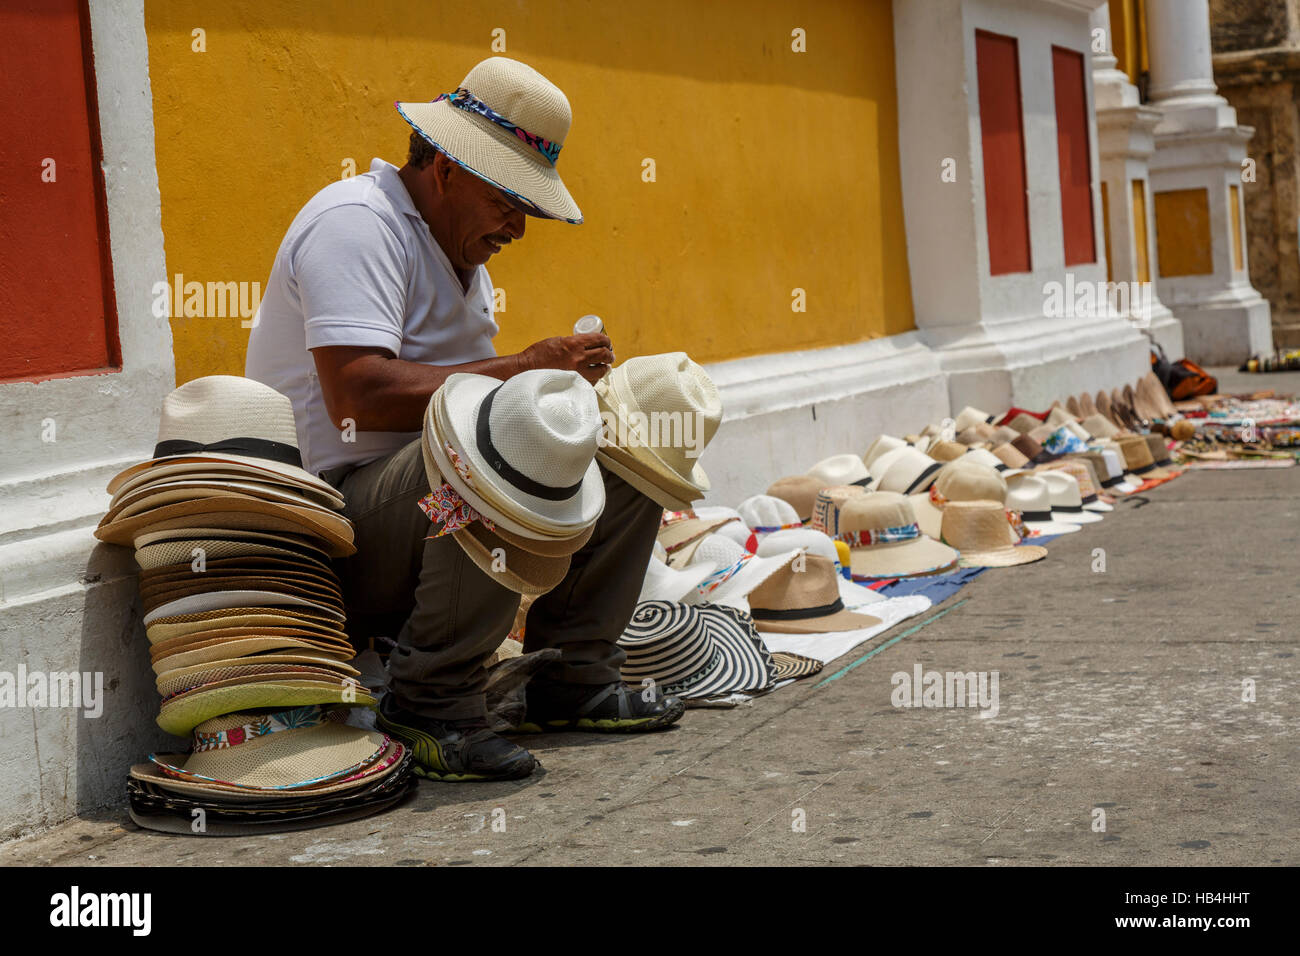 A man sitting amongst his hats for sale on the pavement in a street in Cartagena, Bolivar, Colombia Stock Photo